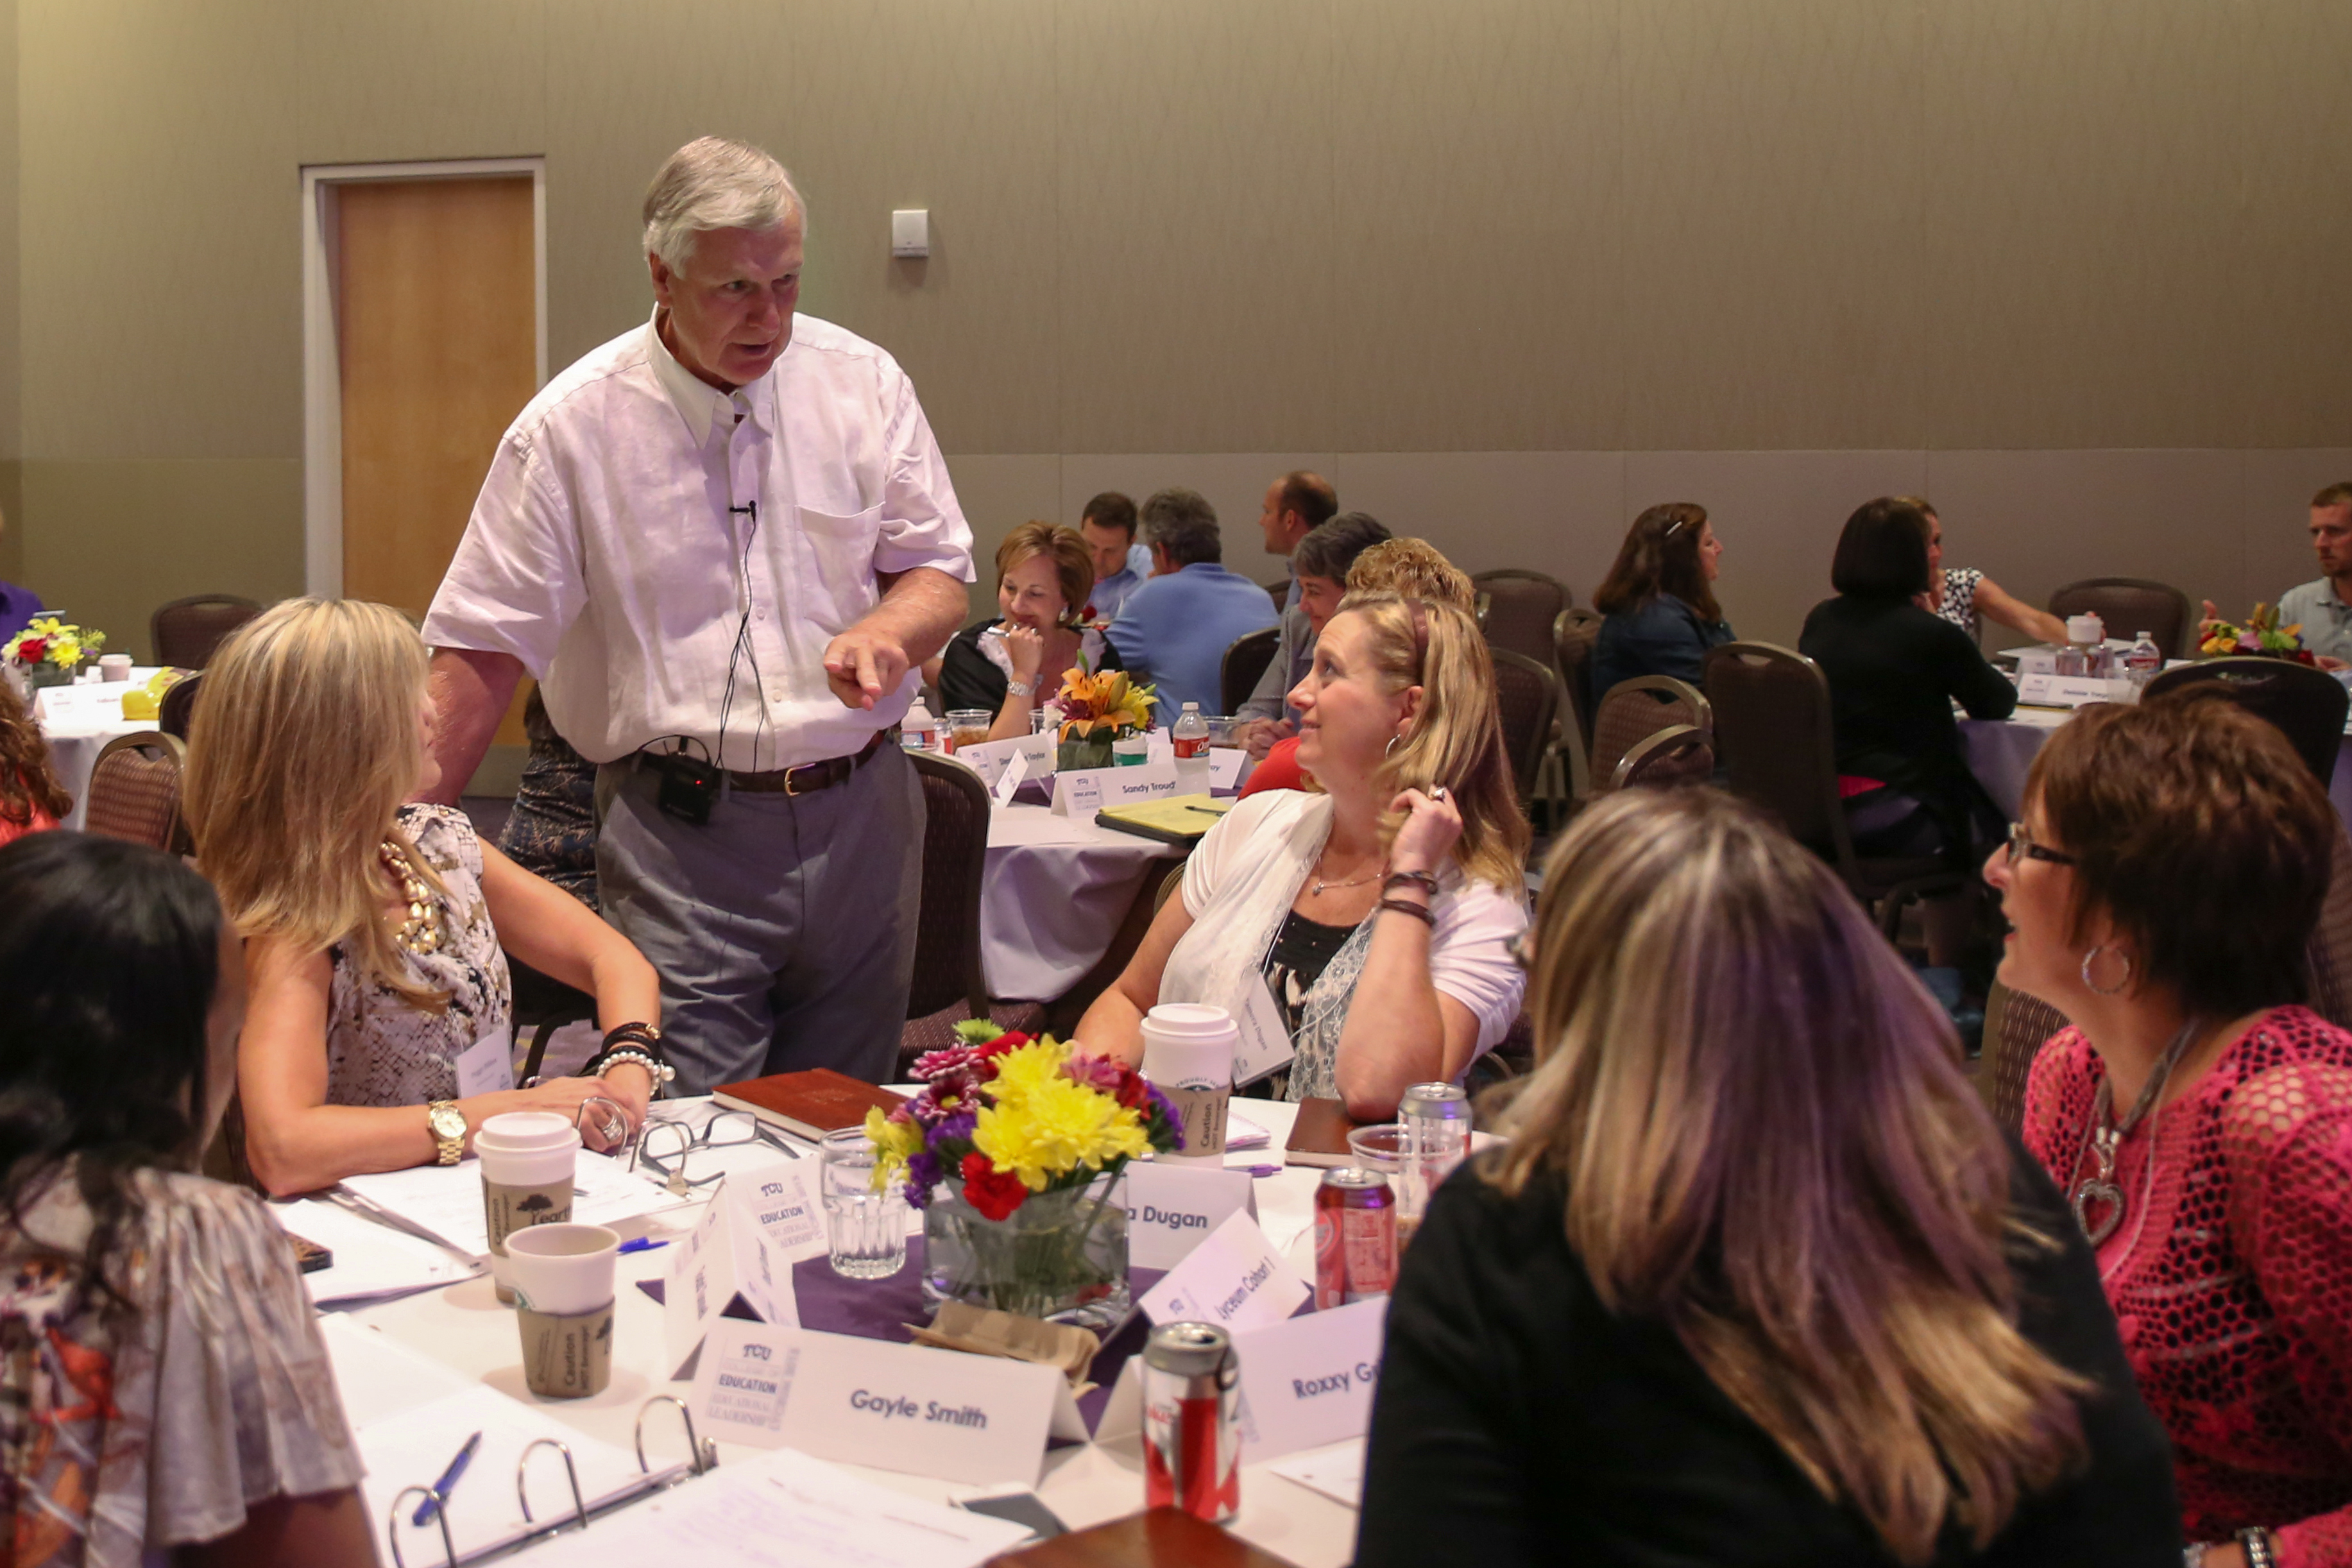 North Texas area principals heard author Timothy Quinn during a session on school leadership. Photo by Amy Peterson.